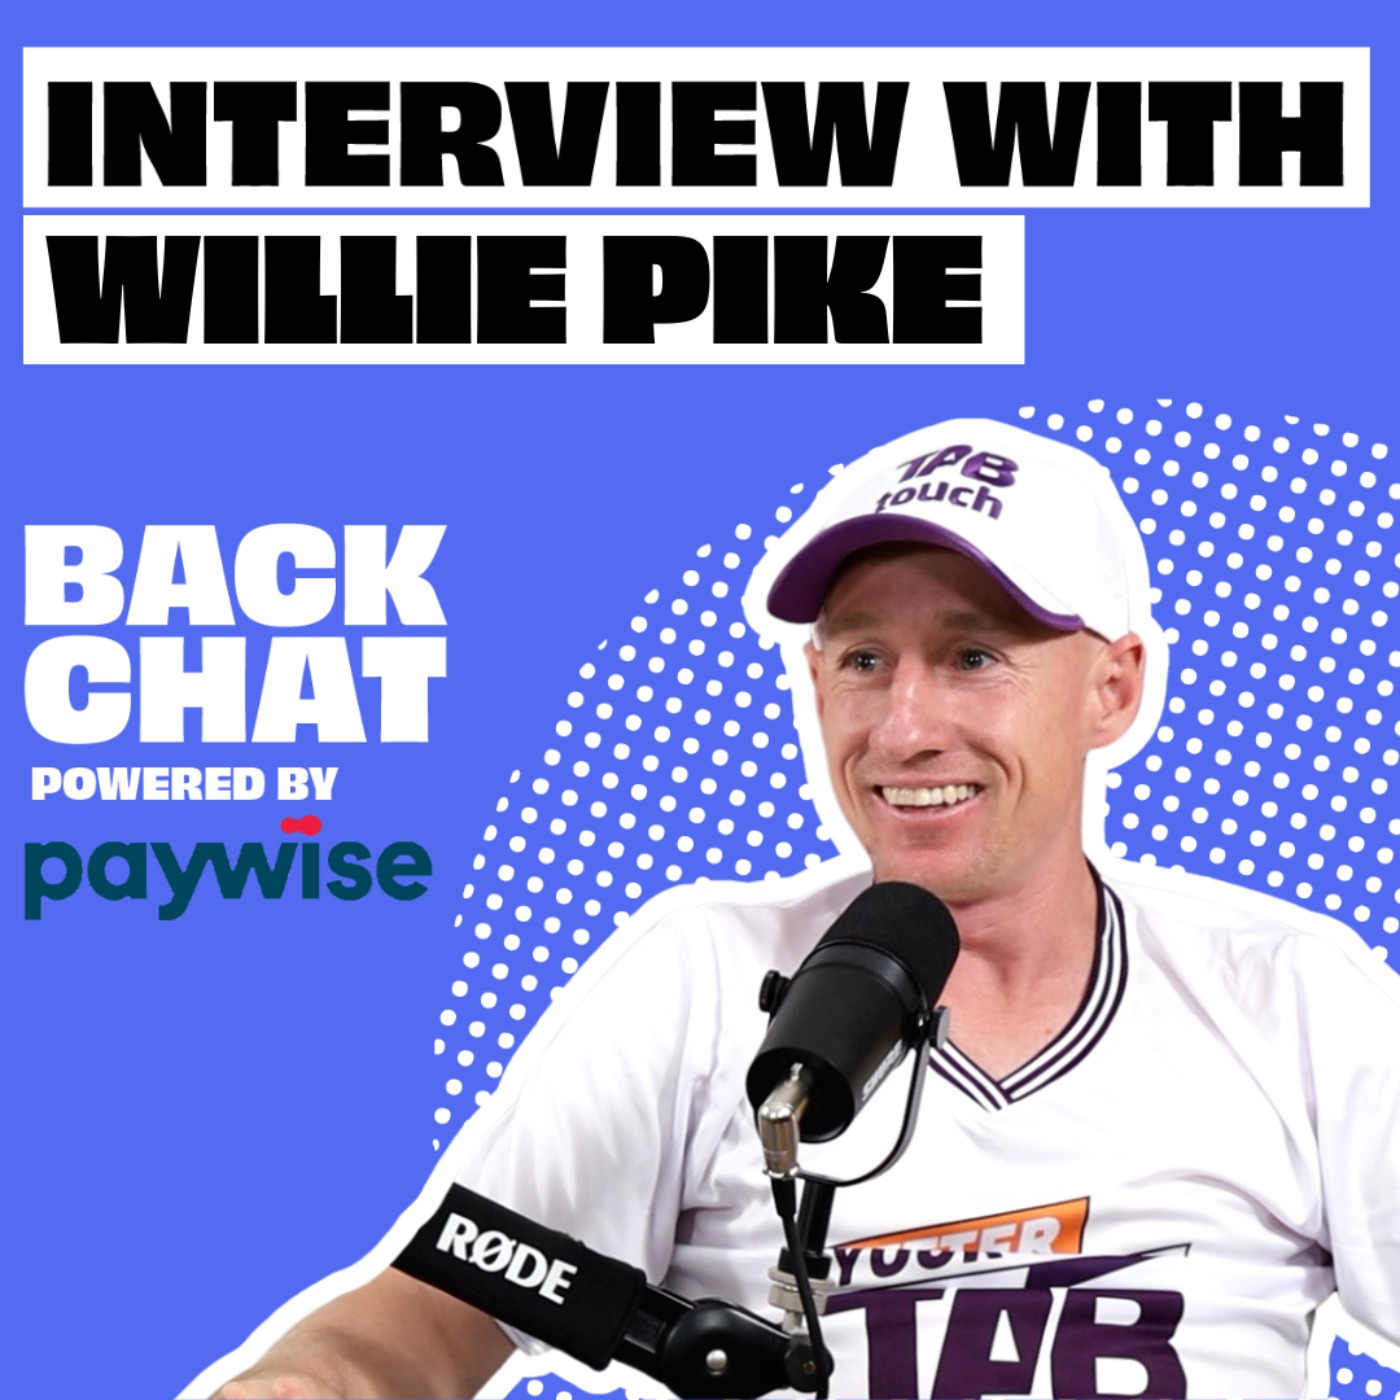 BackChat with William Pike